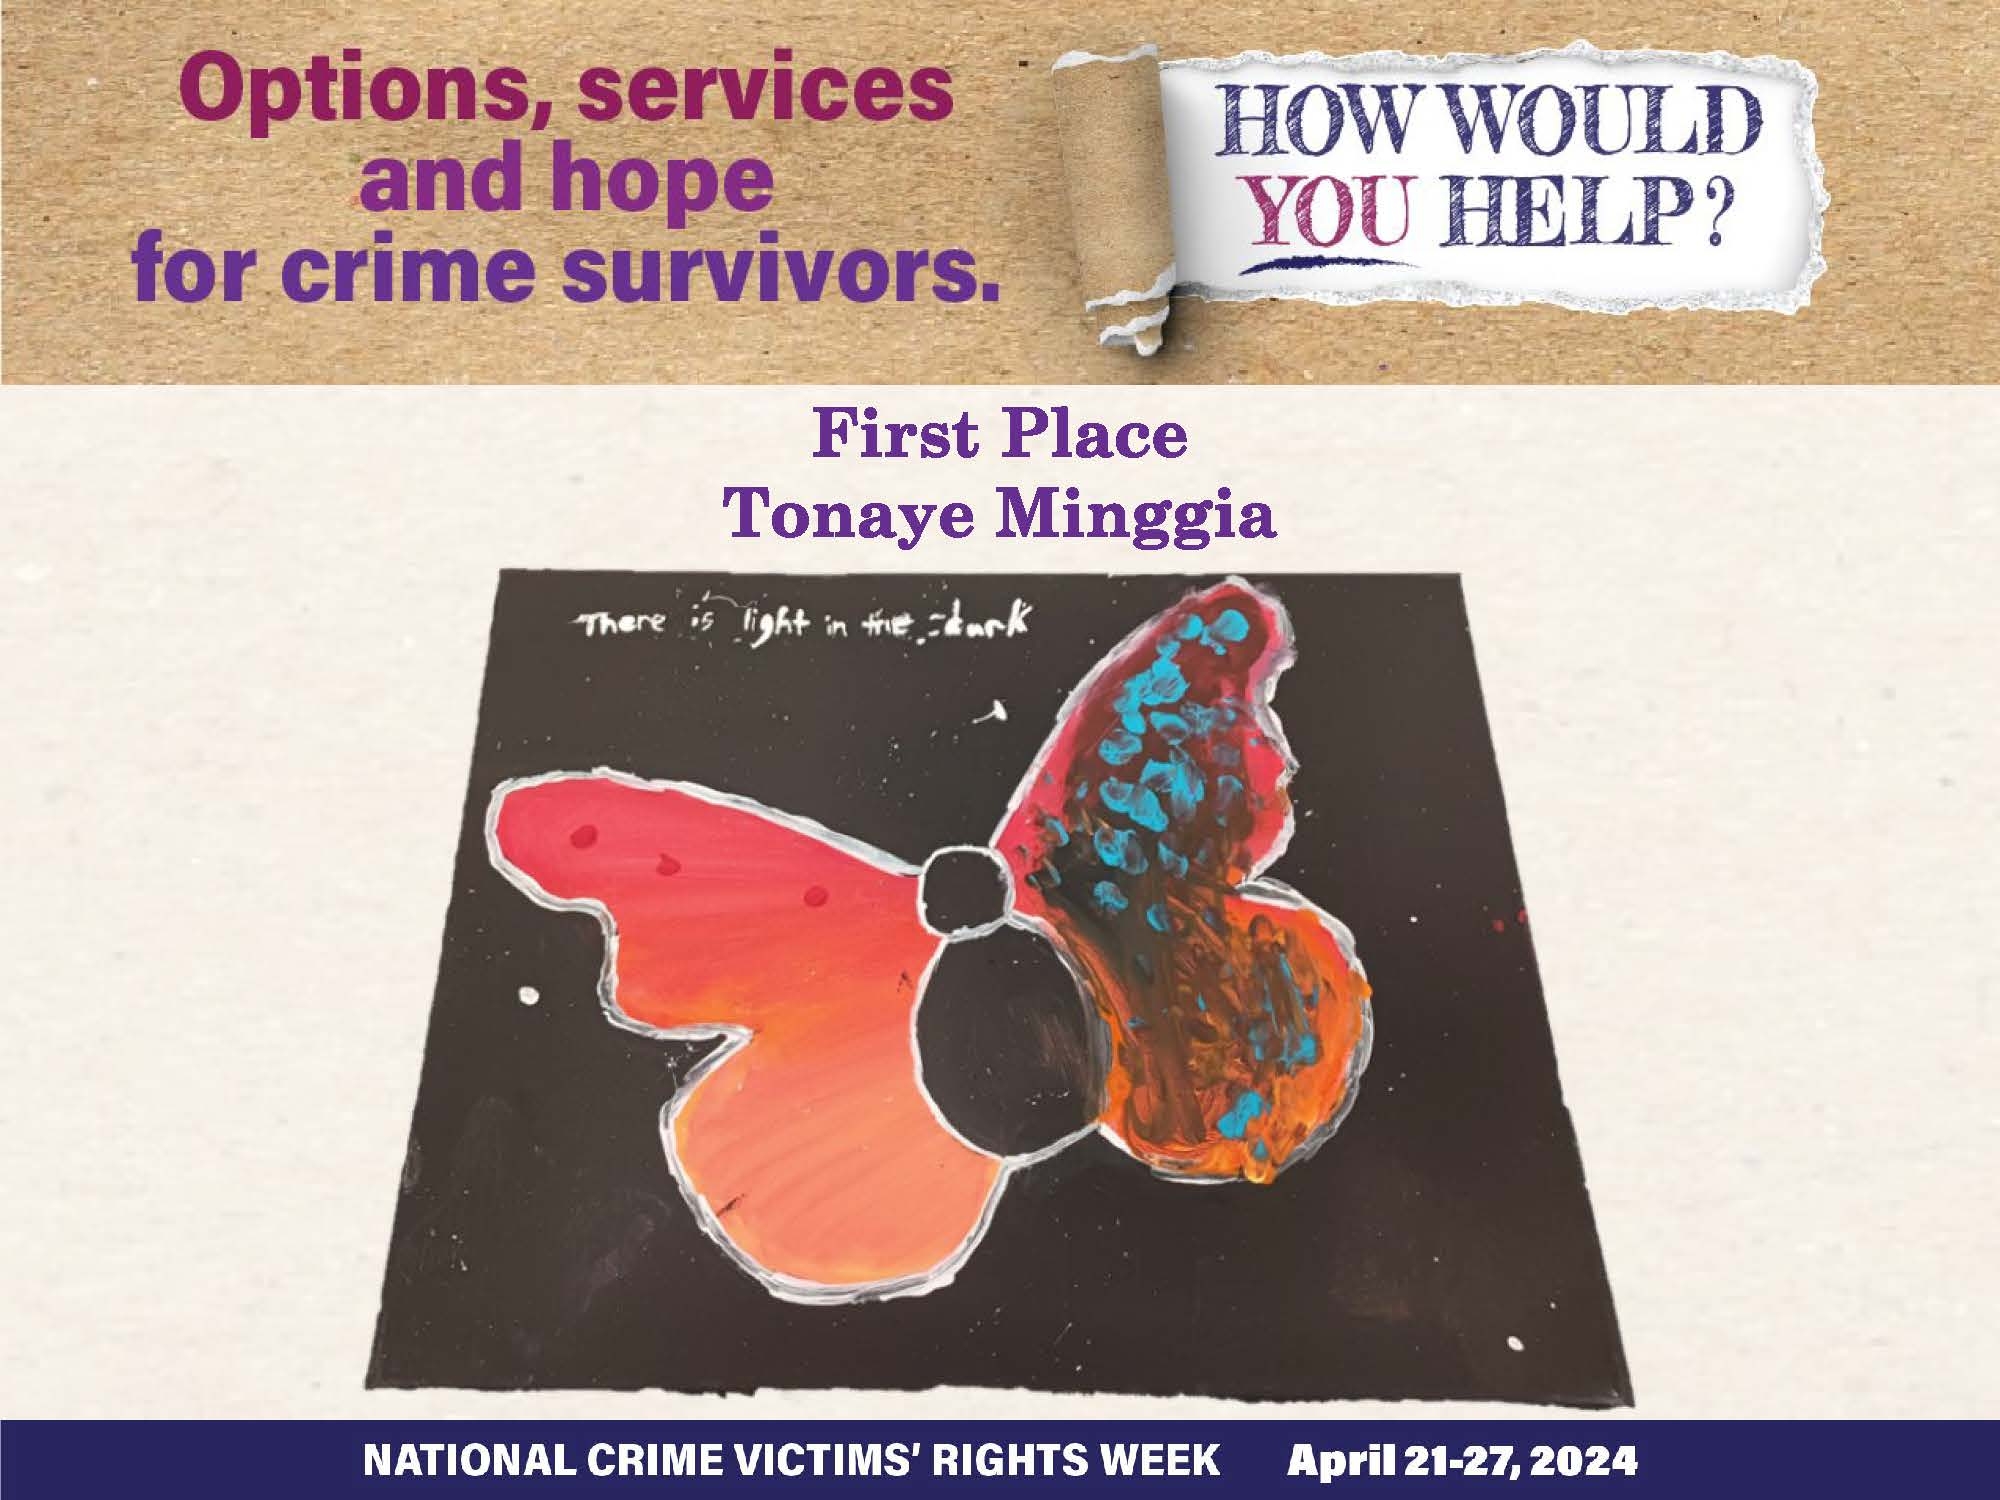 First Place - Tonaye Minggia - Photo of students artwork submitted for NCVRW